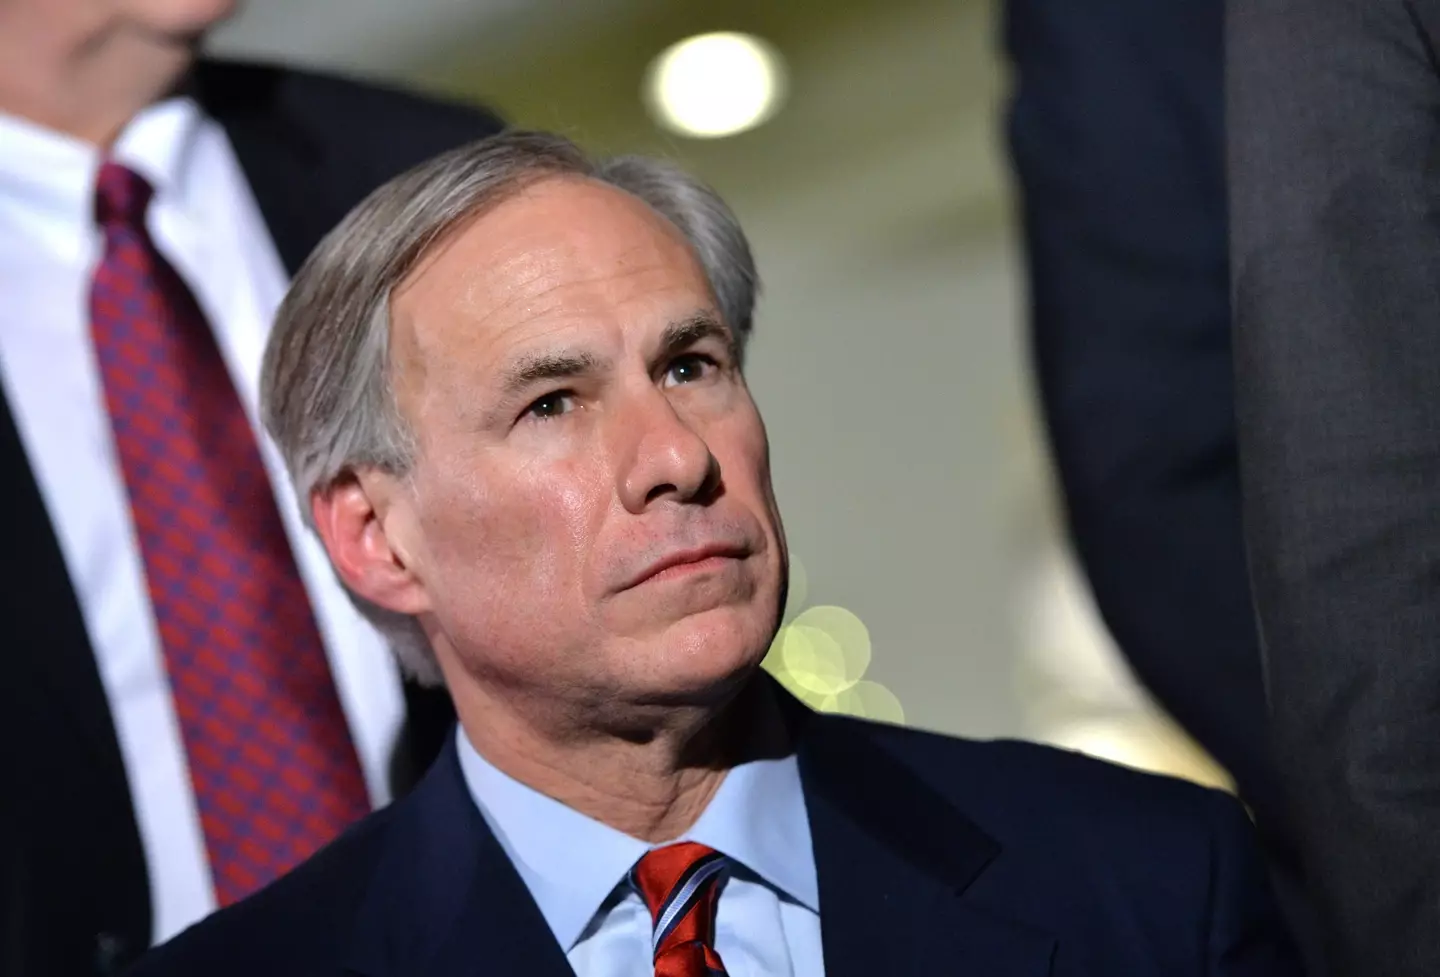 A new advert released by political action group Mothers Against Greg Abbott has been widely shared online.